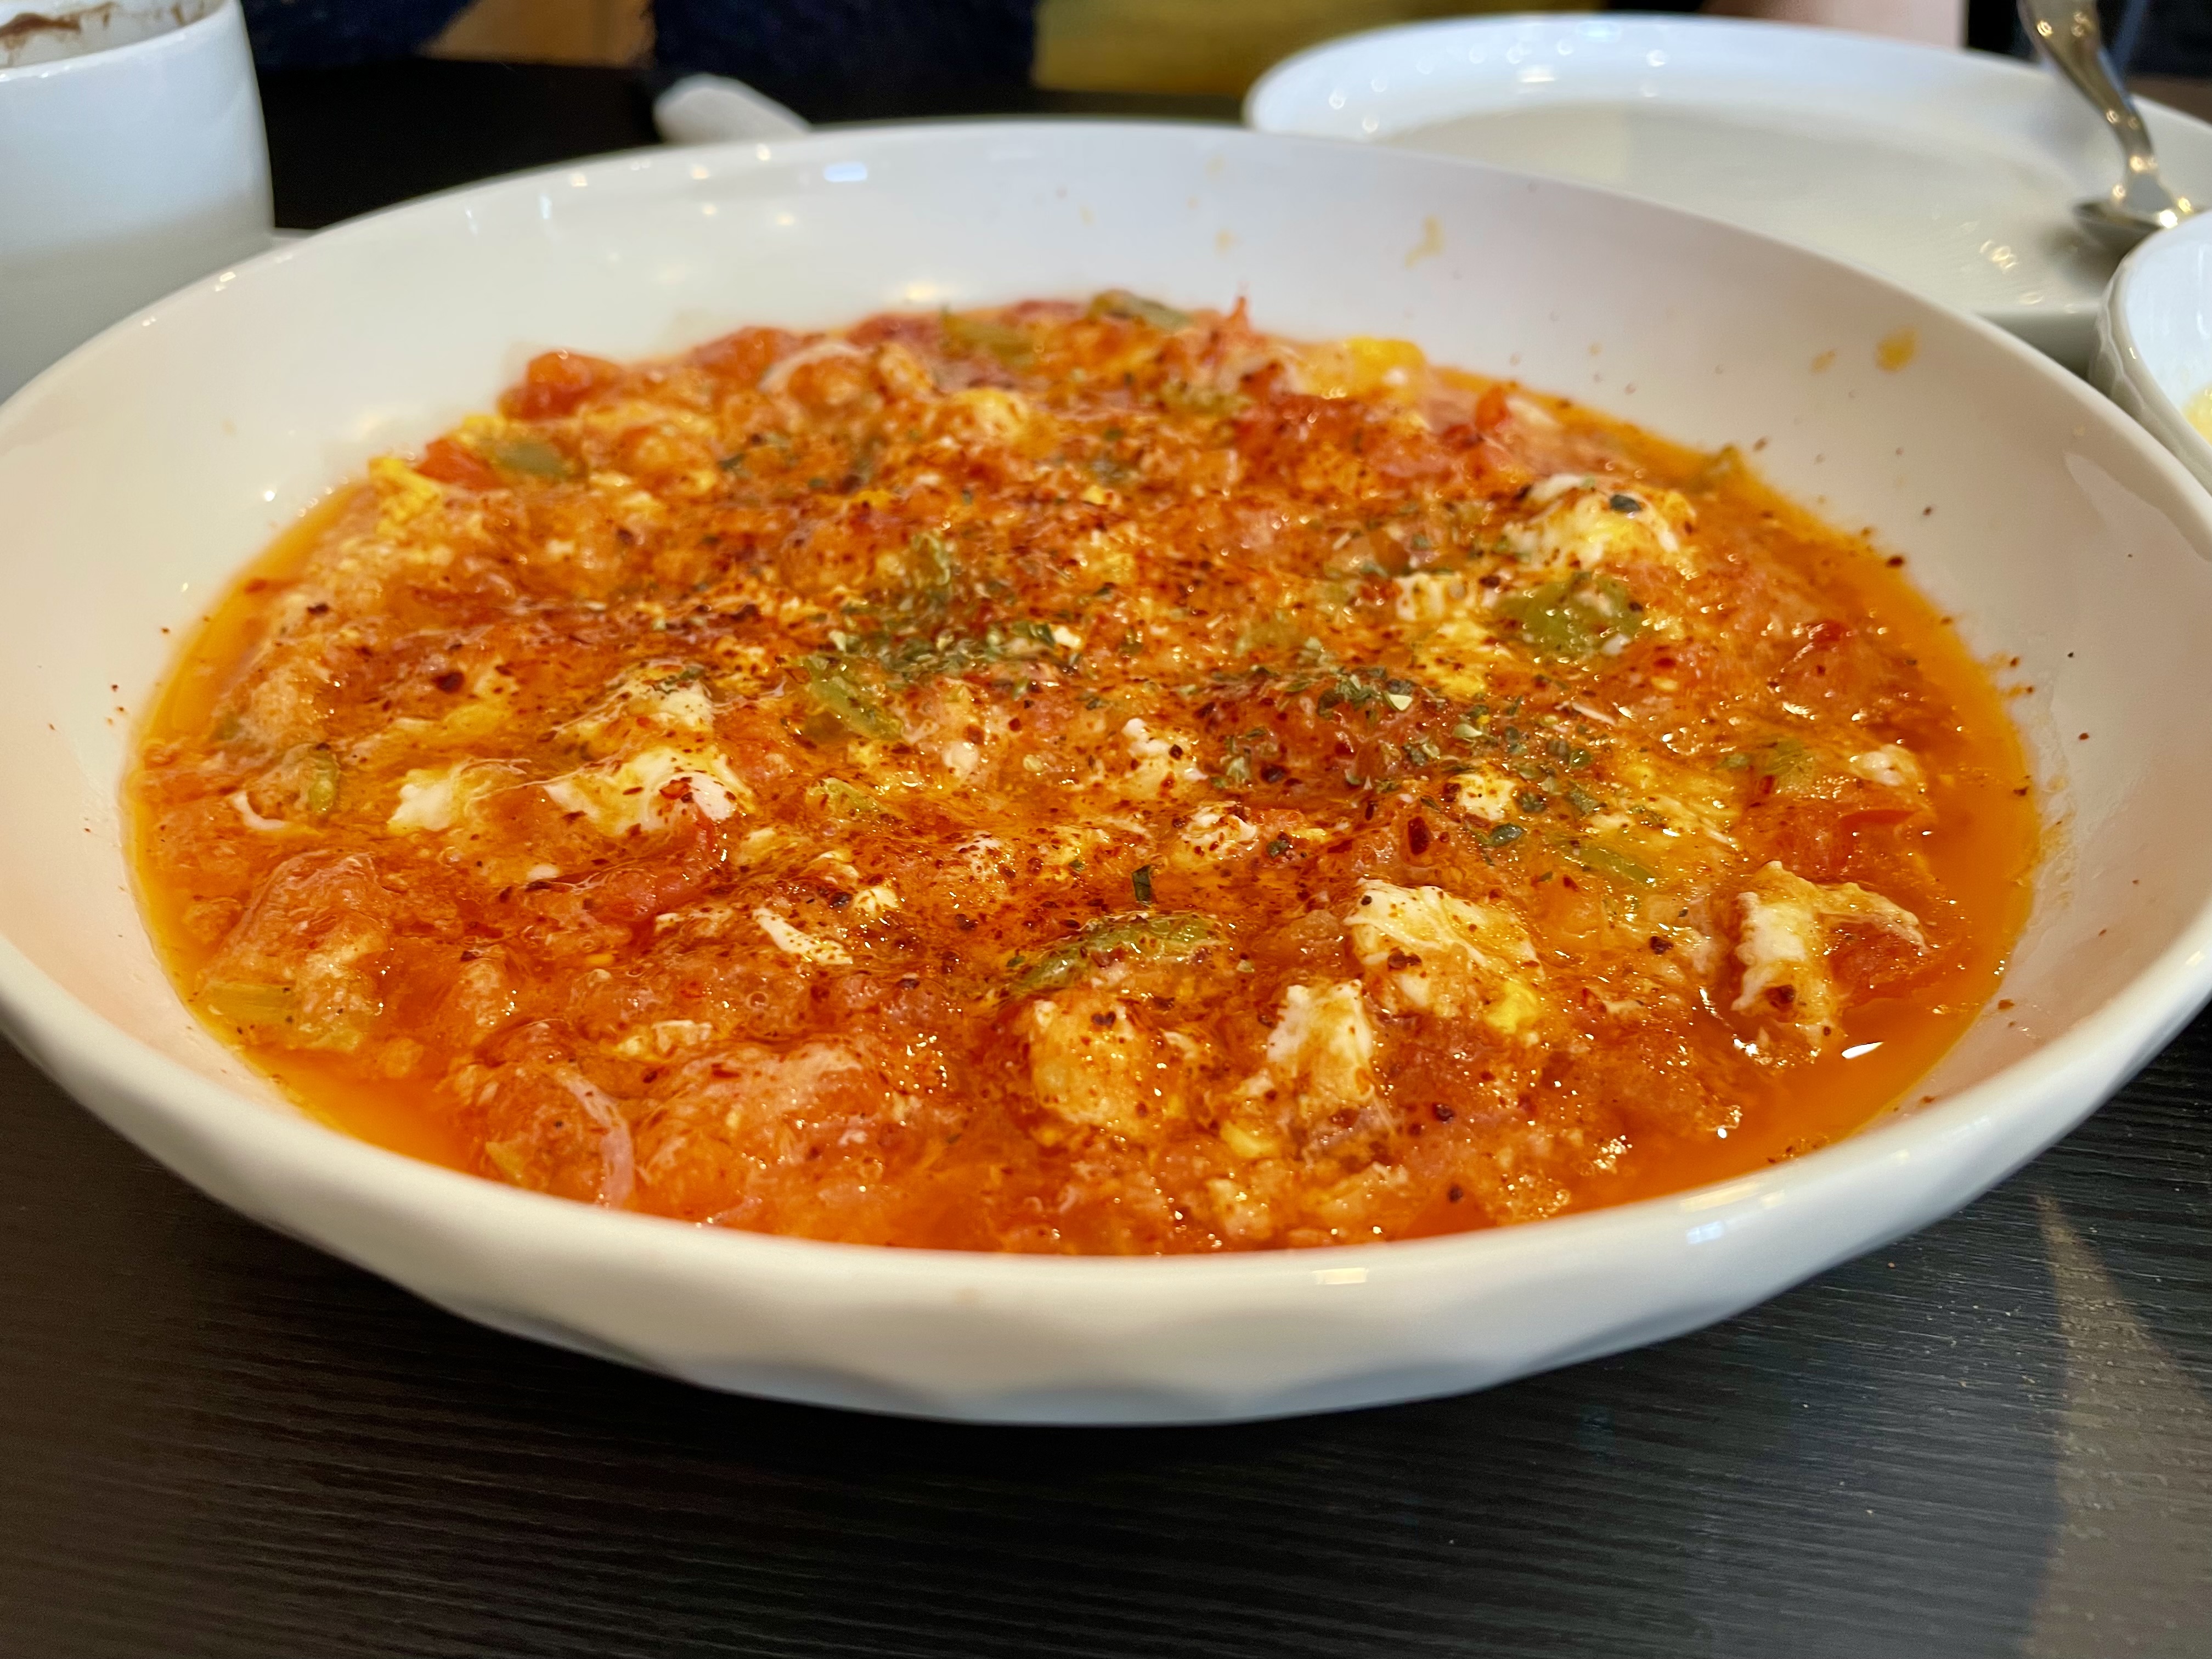 Menemen is a popular Turkish dish that includes eggs, tomato, green peppers and spices such as ground black and red pepper cooked in olive oil